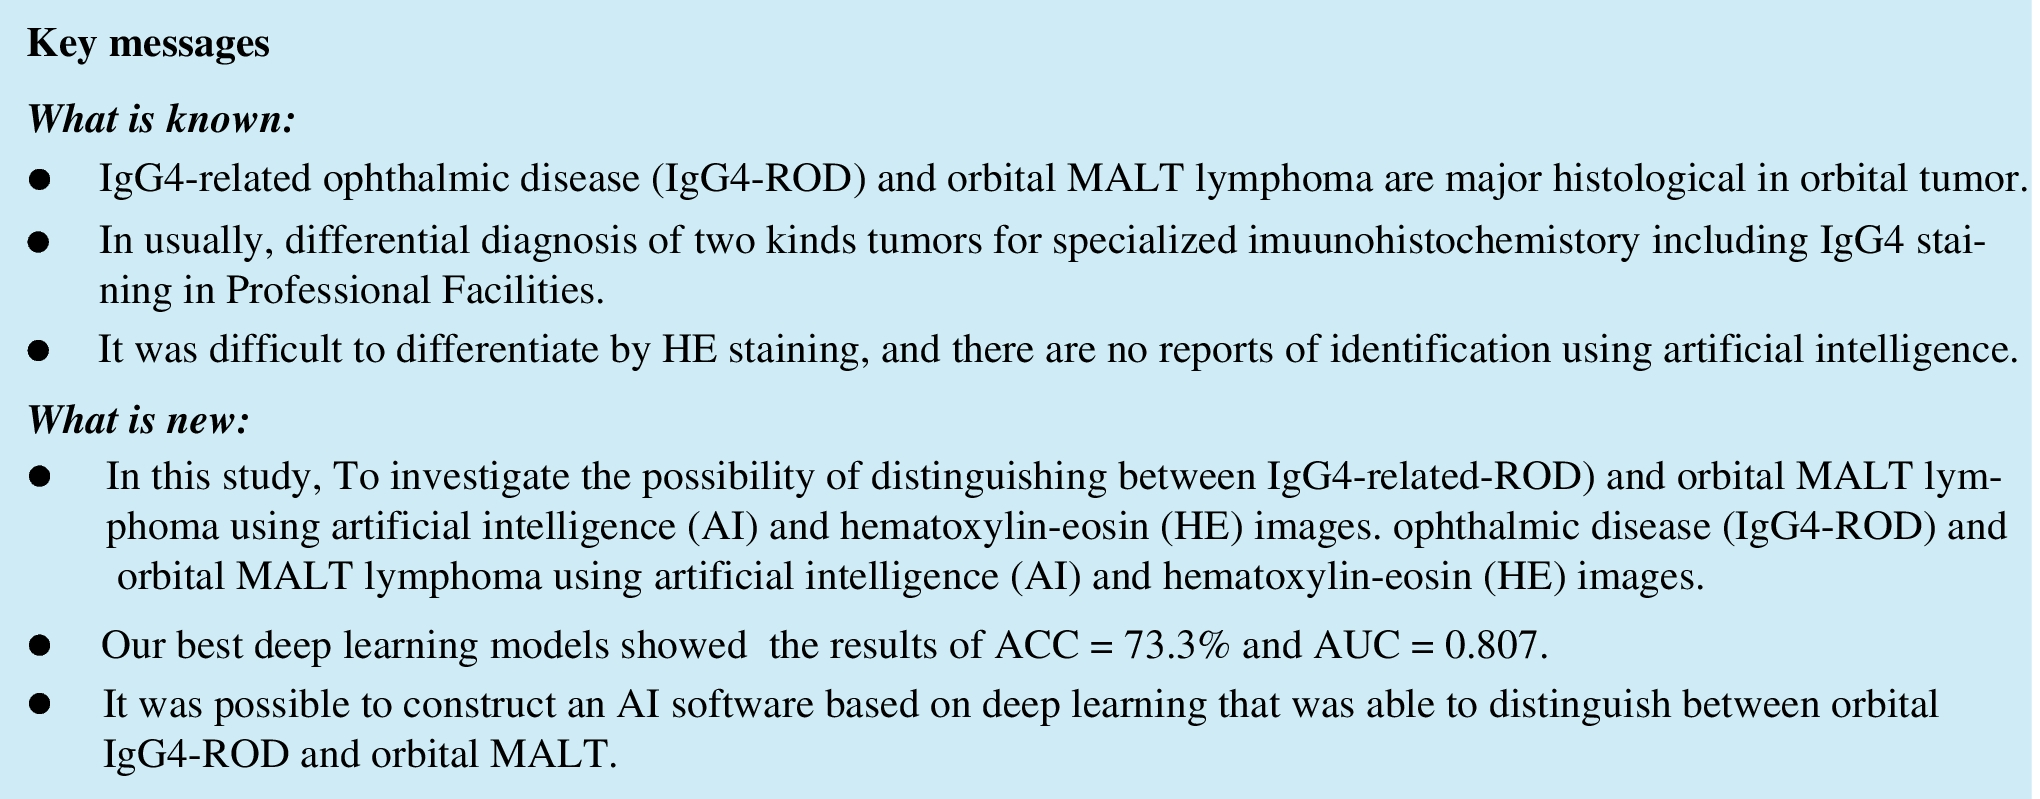 Artificial intelligence-based differential diagnosis of orbital MALT lymphoma and IgG4 related ophthalmic disease using hematoxylin–eosin images